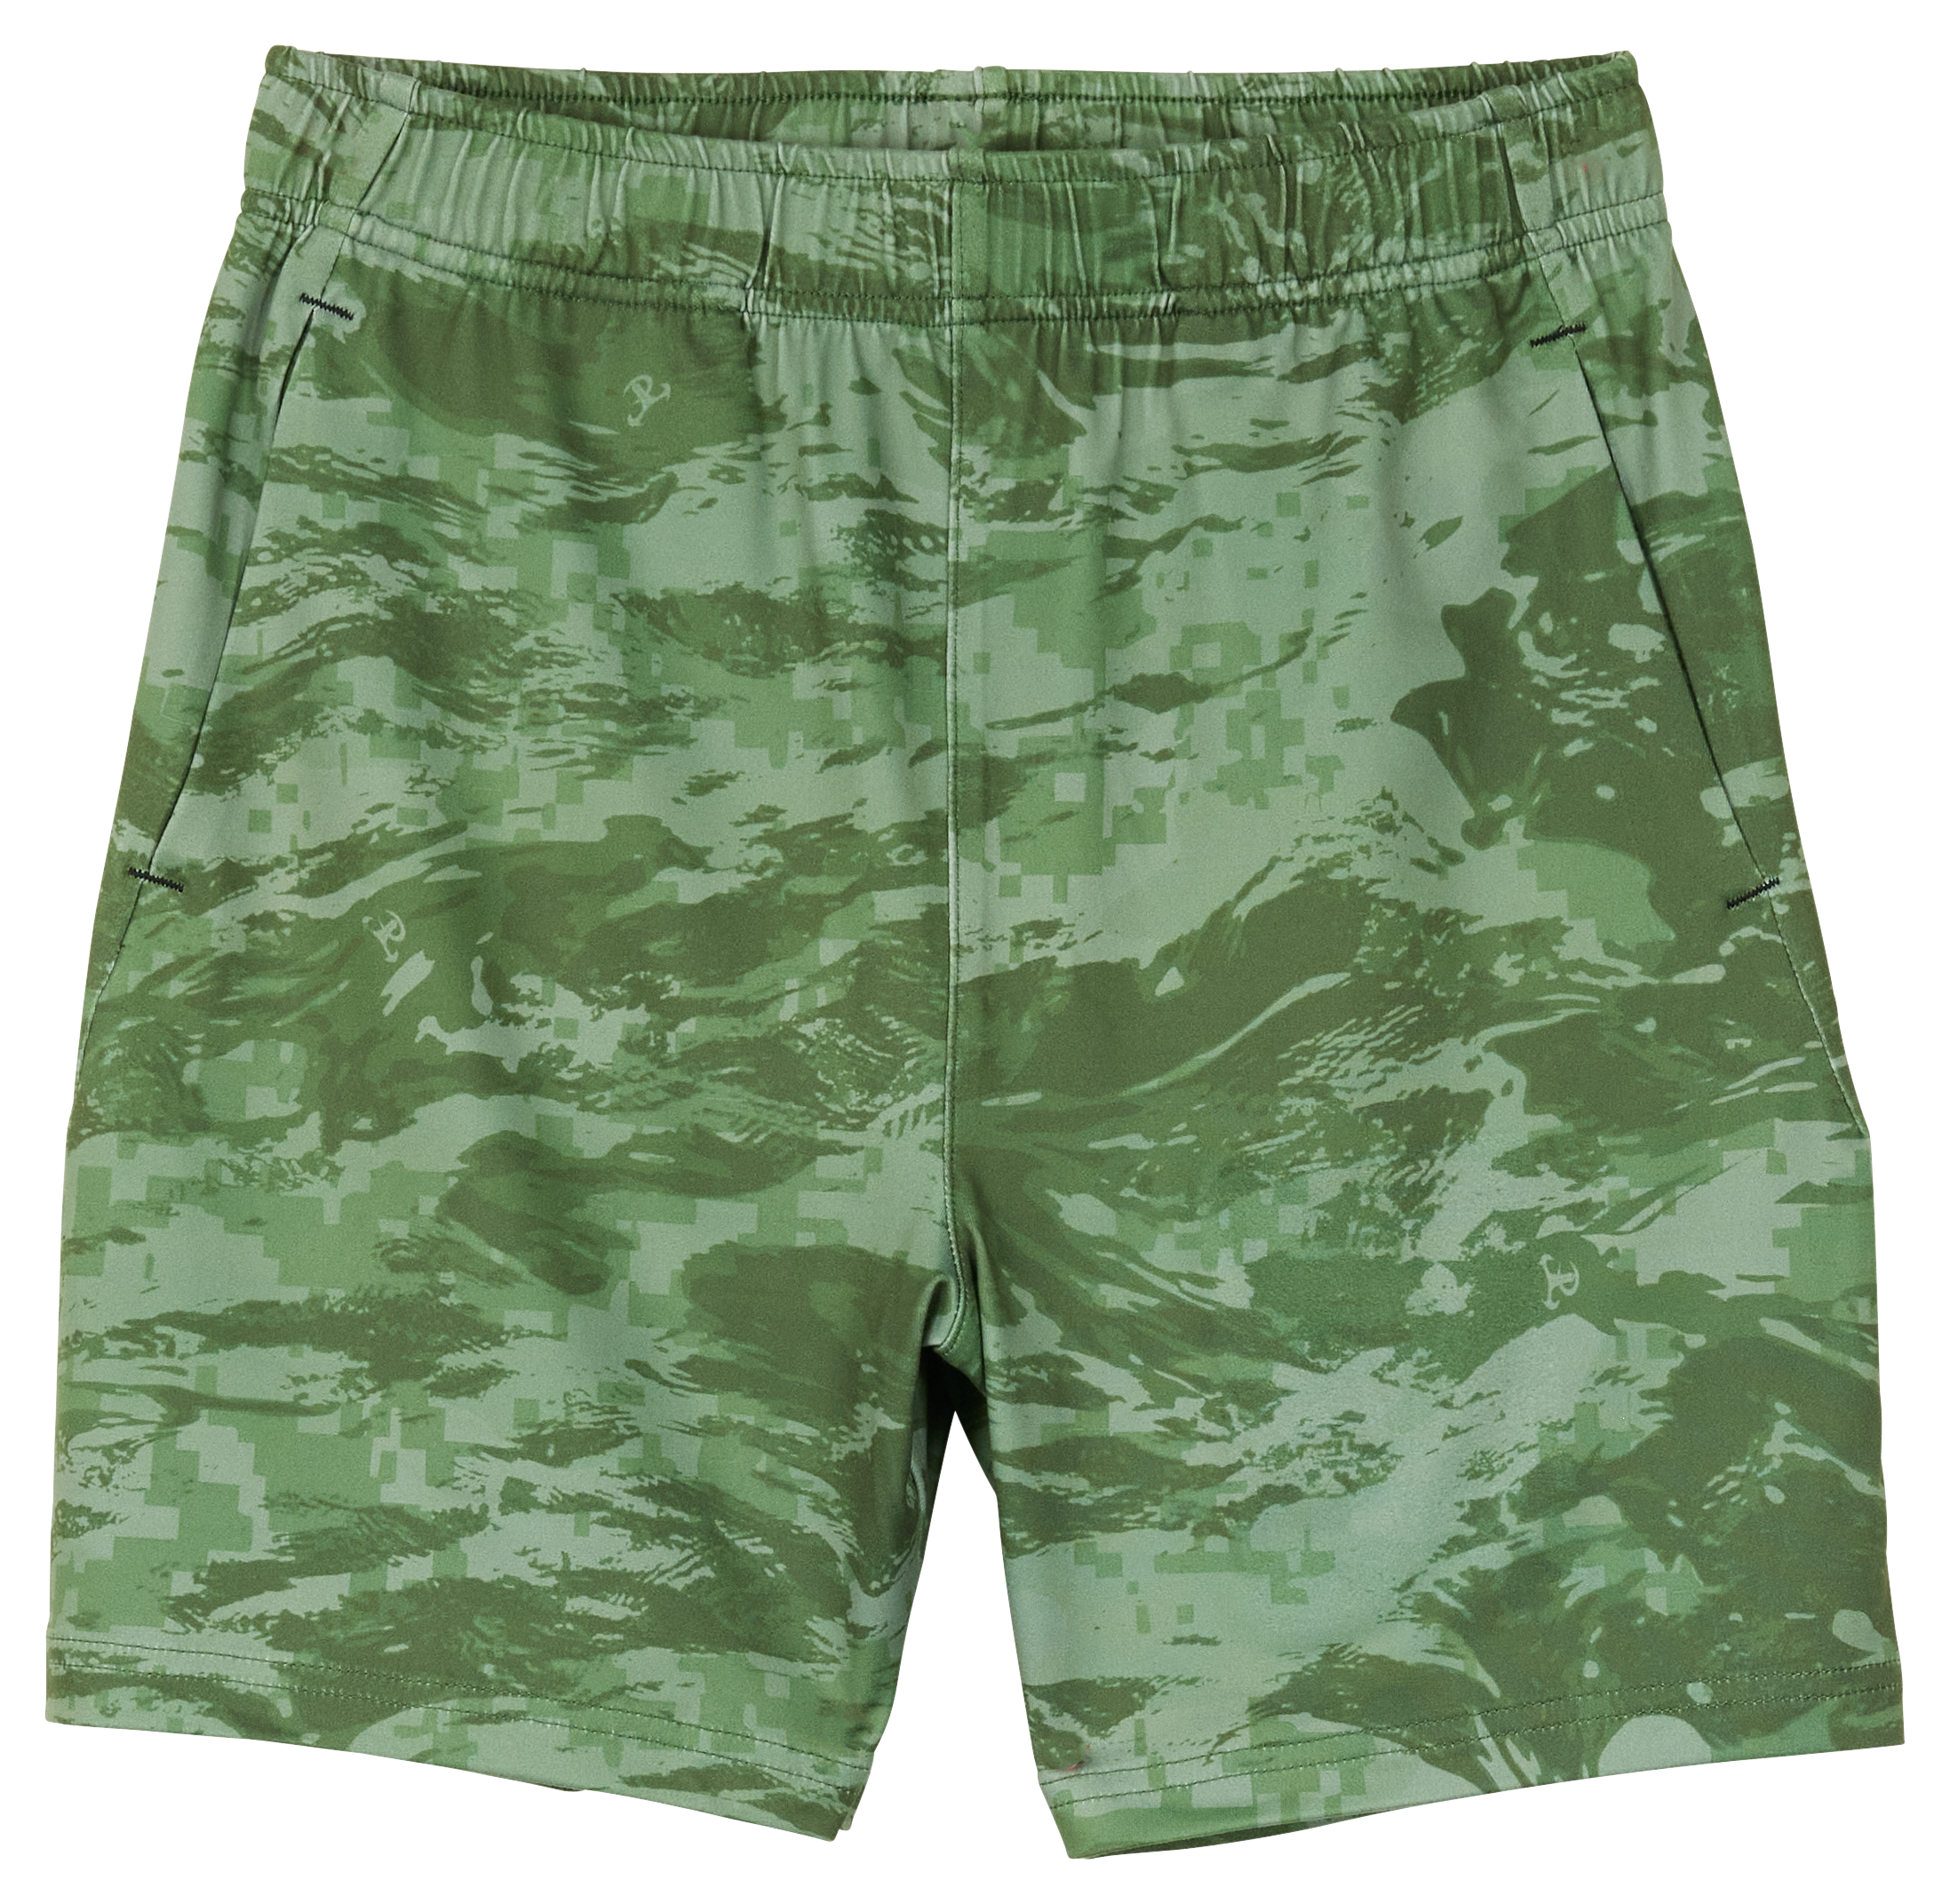 Outdoor Kids Performance Shorts for Kids - Digital Water/Camo - L